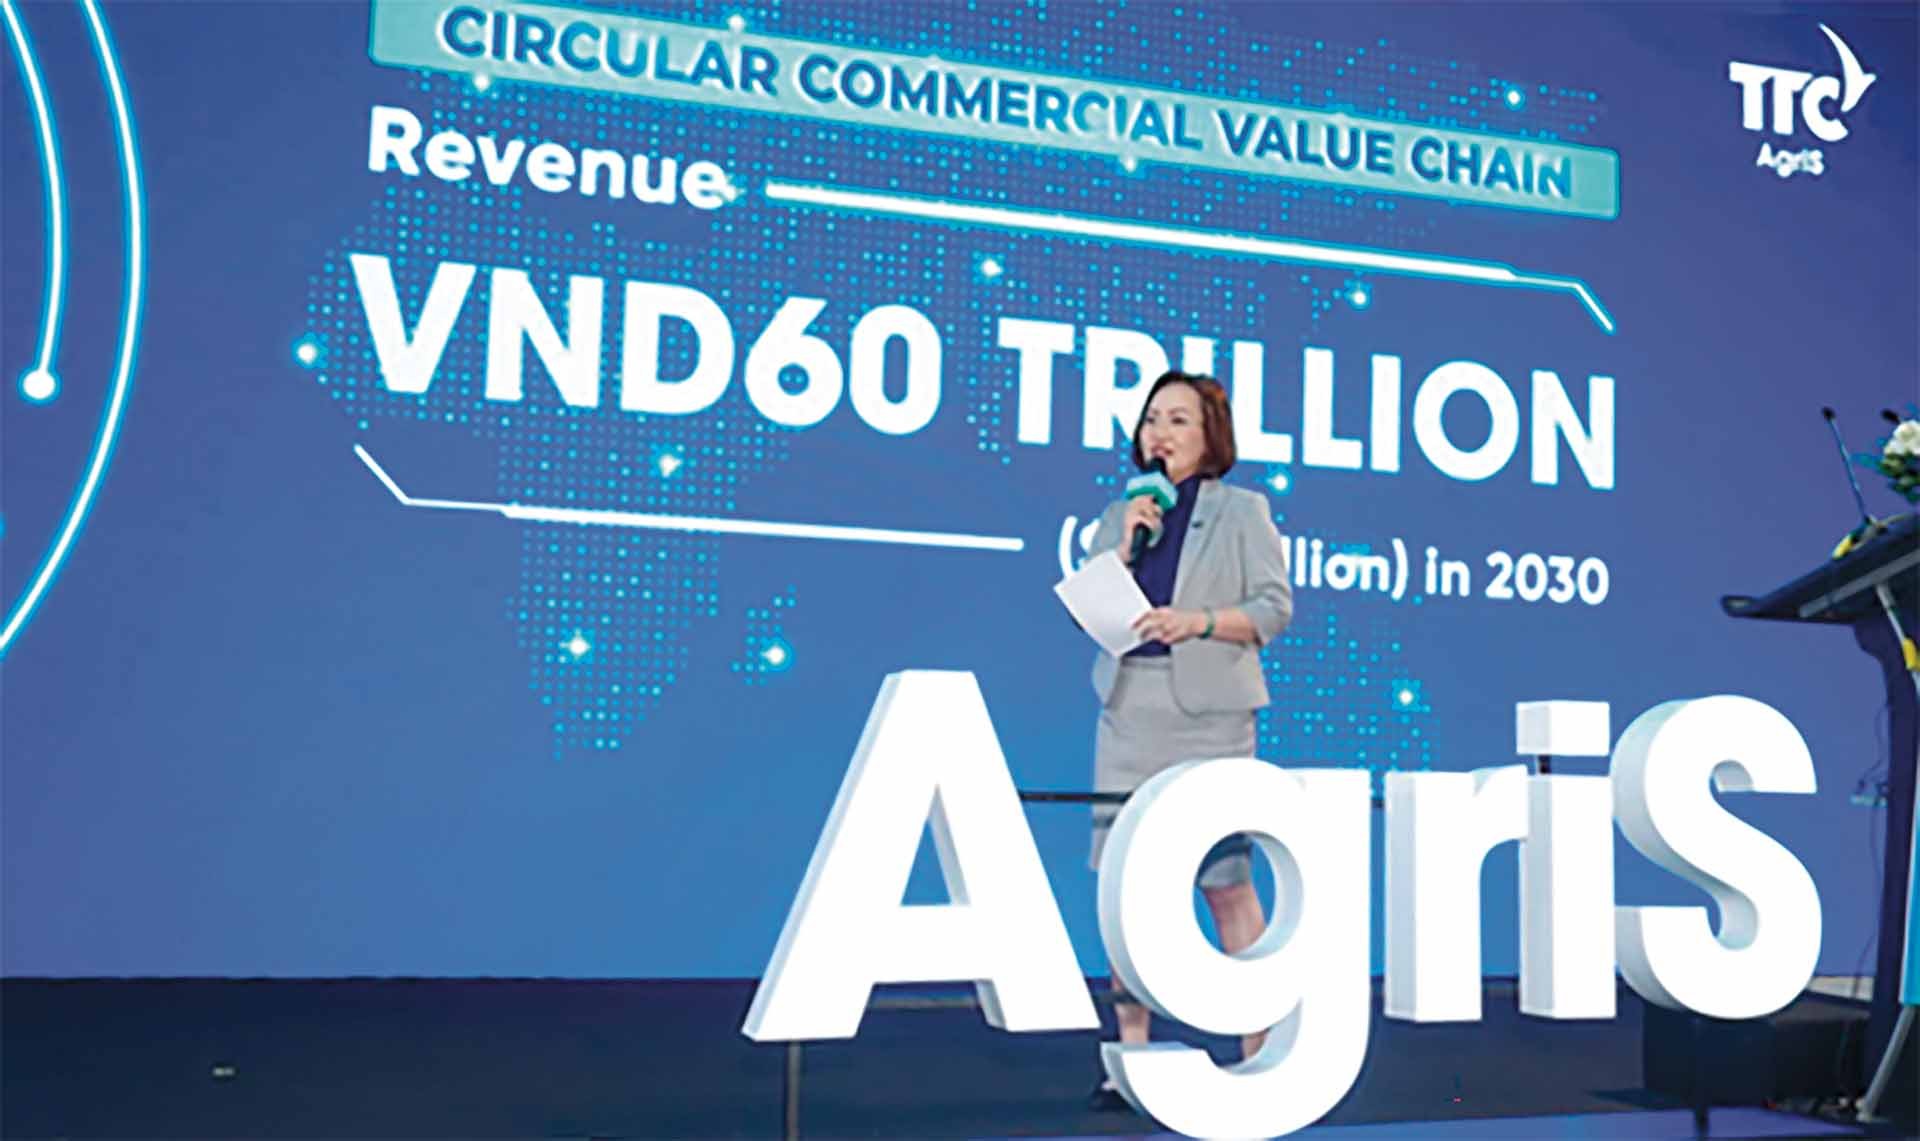 Mrs. Dang Huynh Uc My - Vice Chairlady of TTC AgriS emphatically stated, “With the invaluable contributions of our Valued Shareholders, Partners and the integration of a cutting-edge production system, along with strategic plans and investments, TTC AgriS